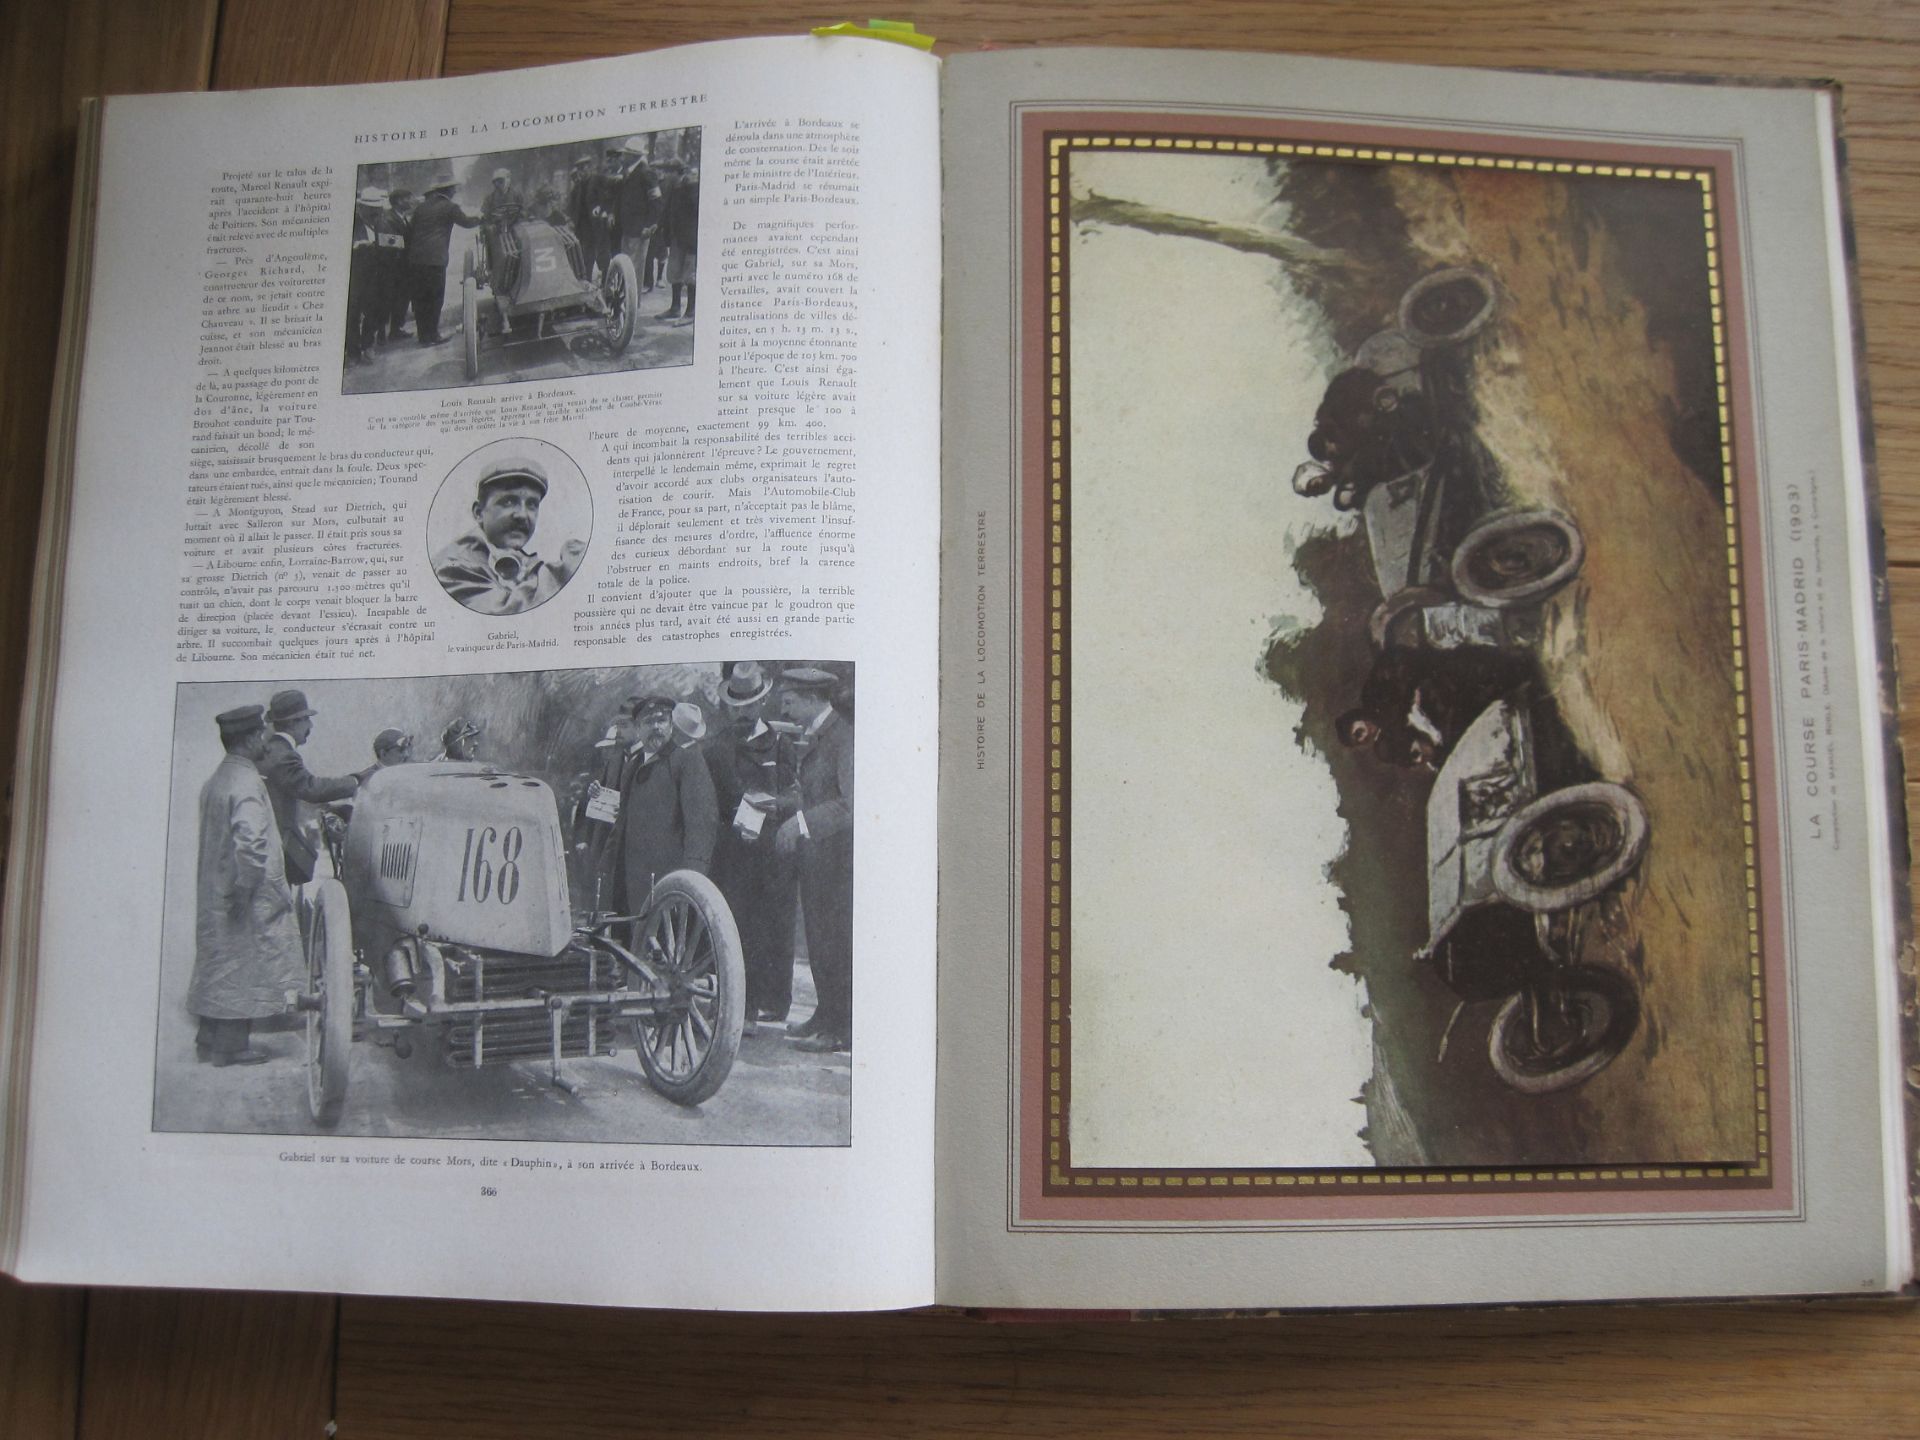 Histoire de la Locomotion Terrestre, a large folio volume in French, fully illustrated and depicting